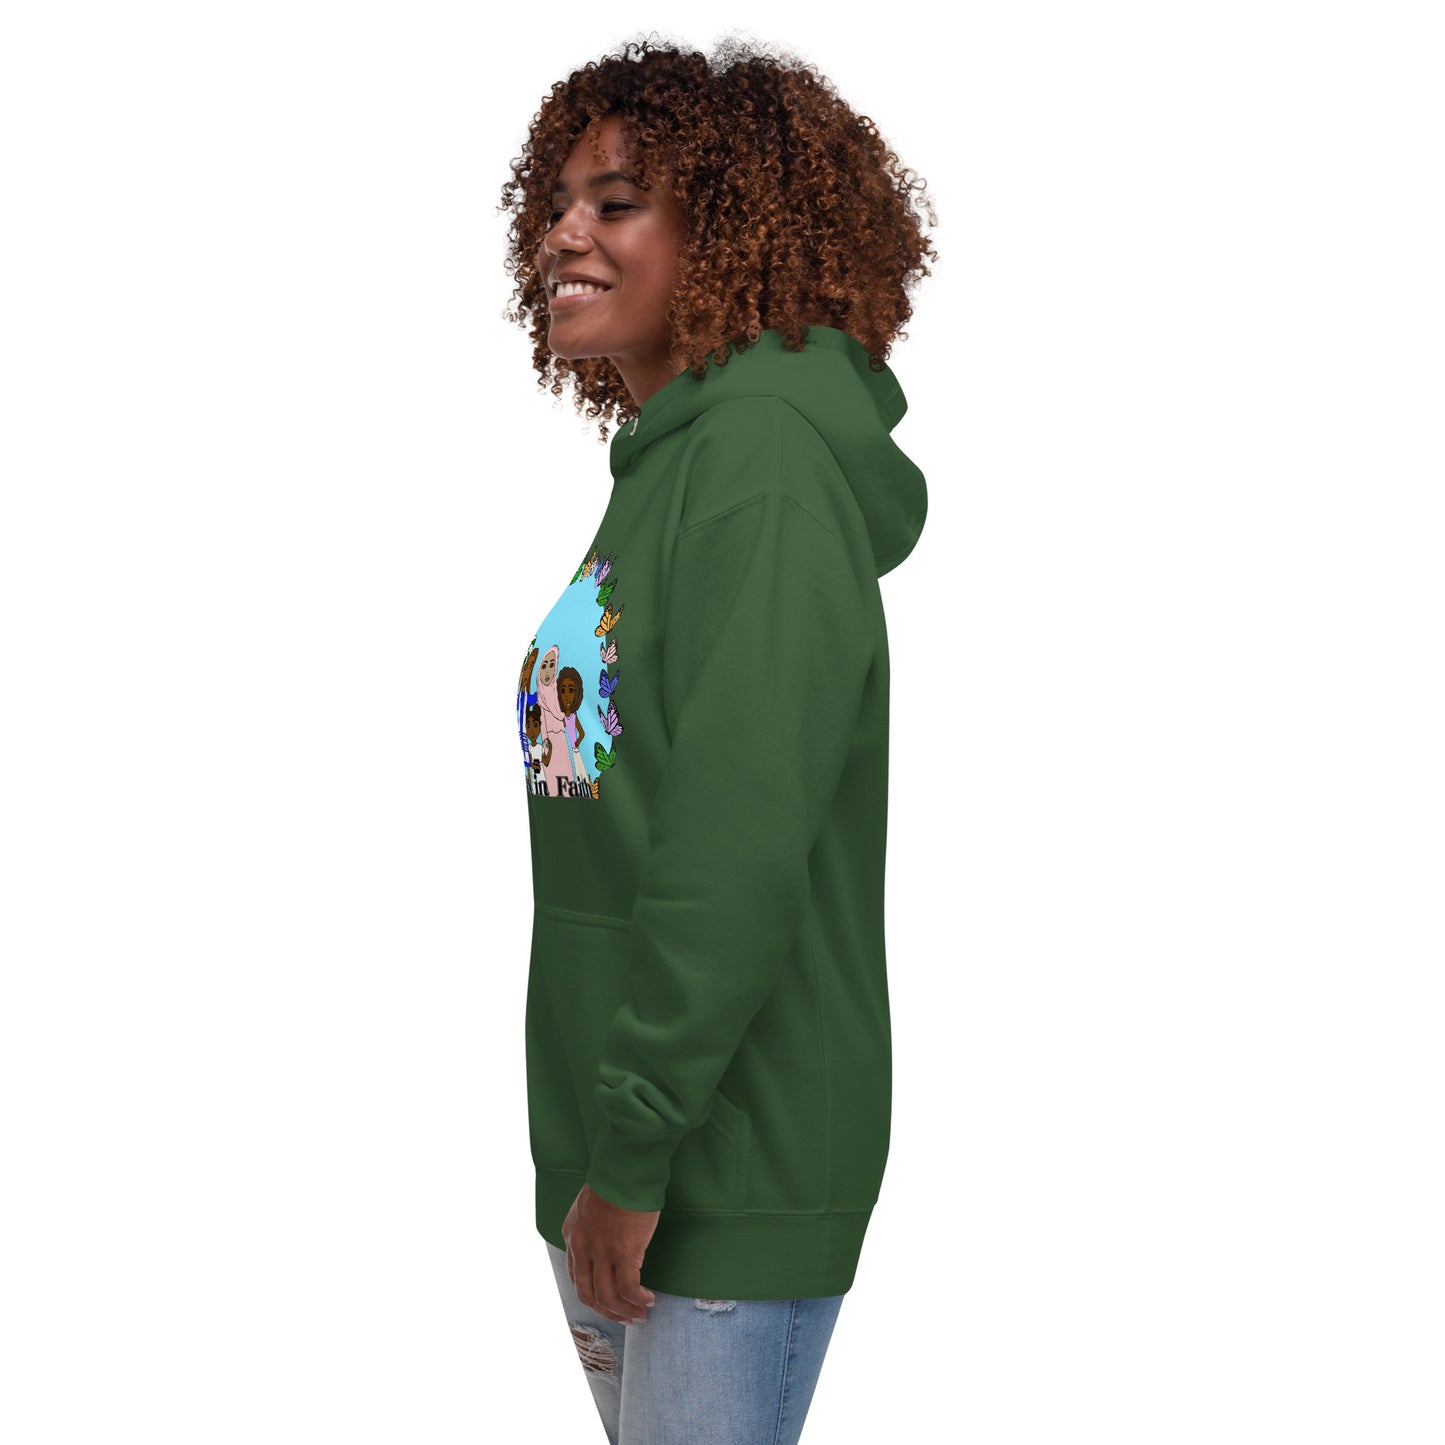 Sisters in Faith, Adult Sweatshirt Hoodie, Sky Blue | Celebrating diverse traditions of spirituality and religion